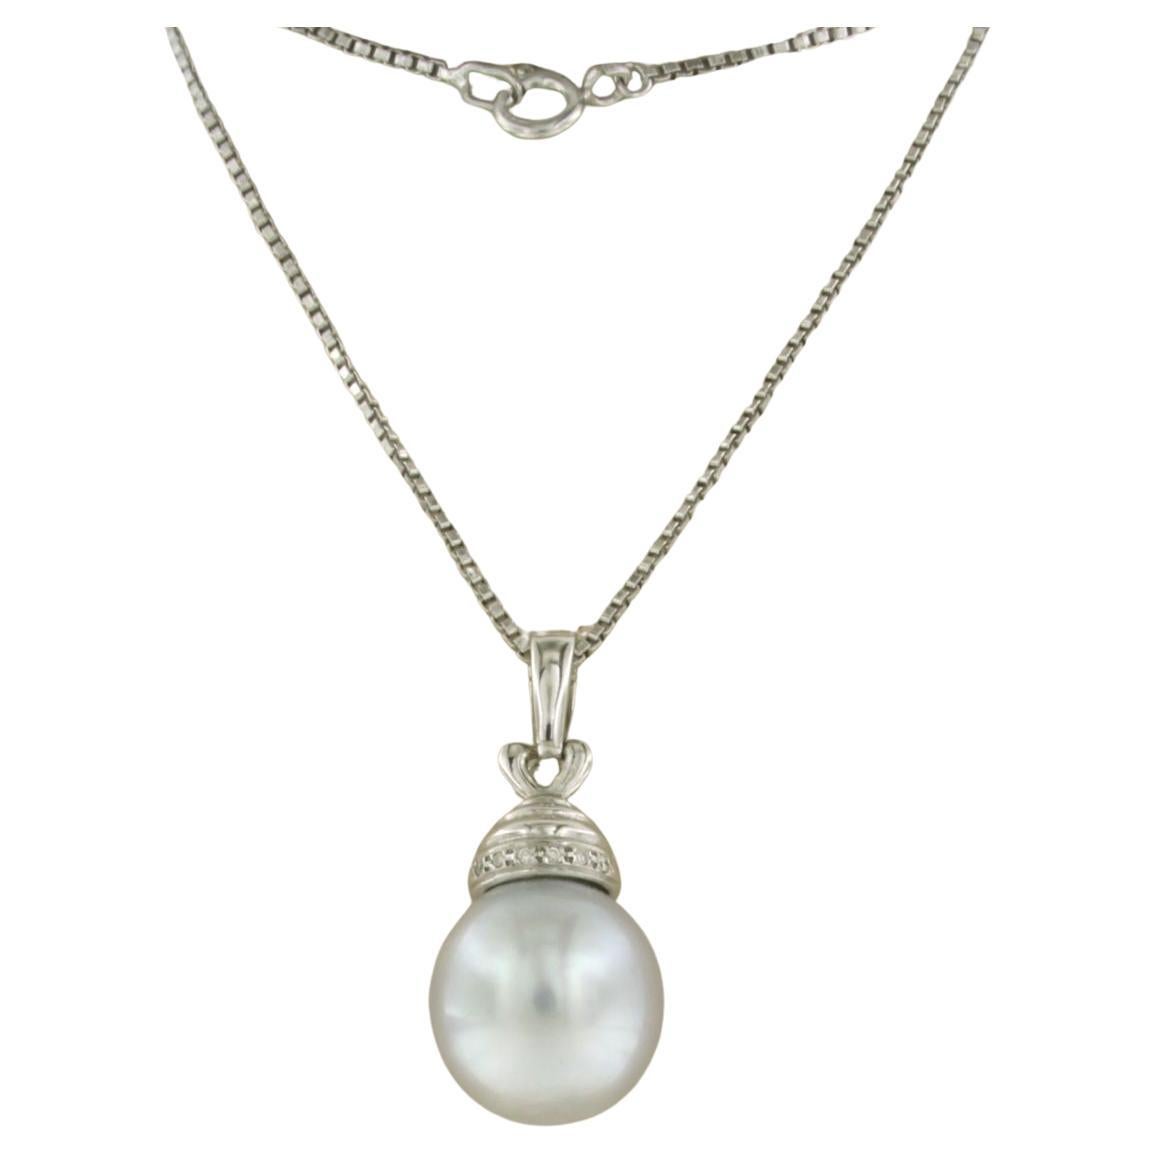 Necklace an d pendant set with pearl and diamonds 18k white gold